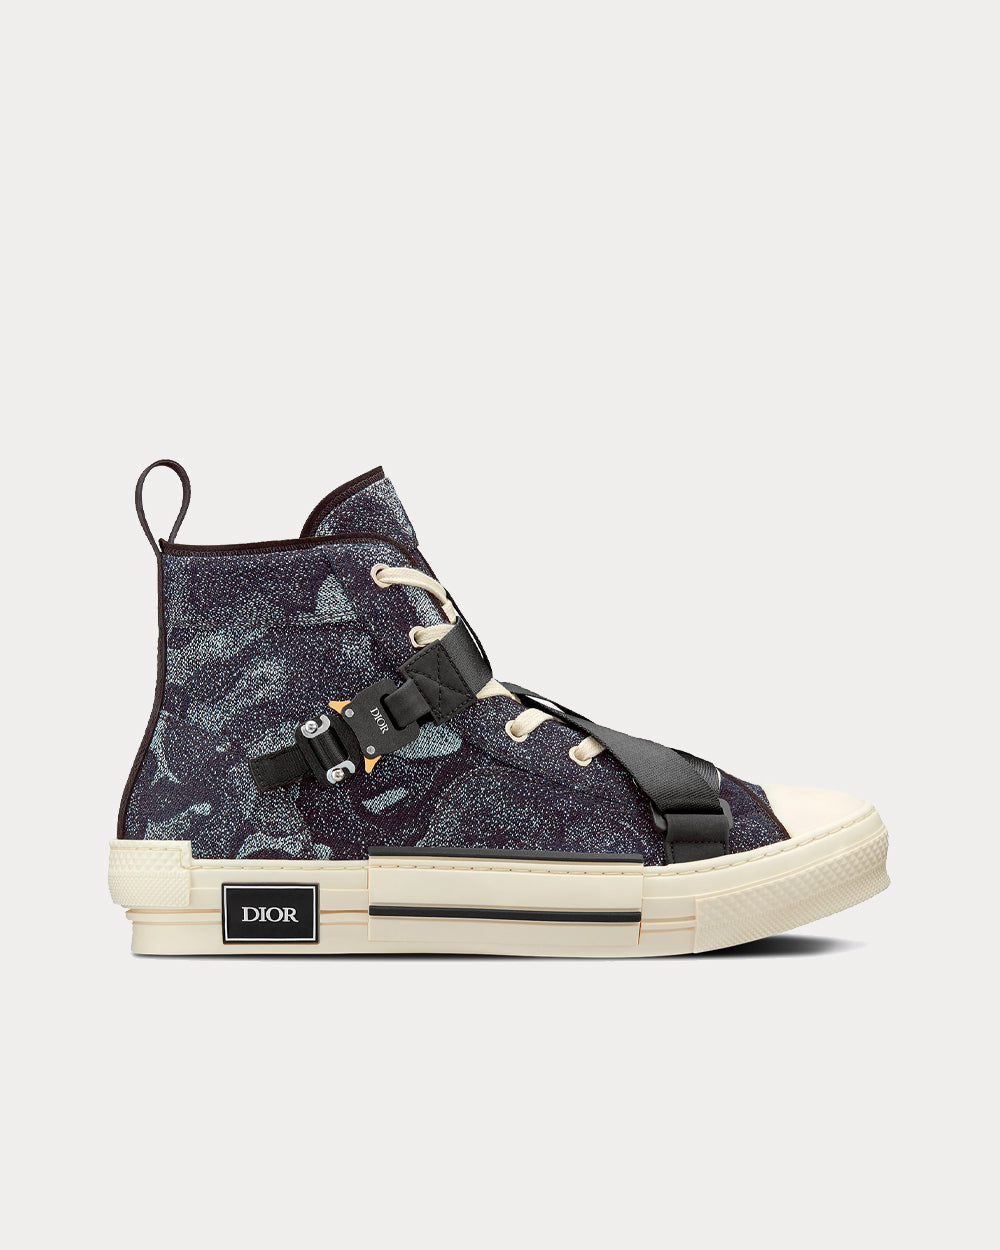 Dior x Peter Doig B23 Denim Camouflage Jacquard High Top Sneakers 